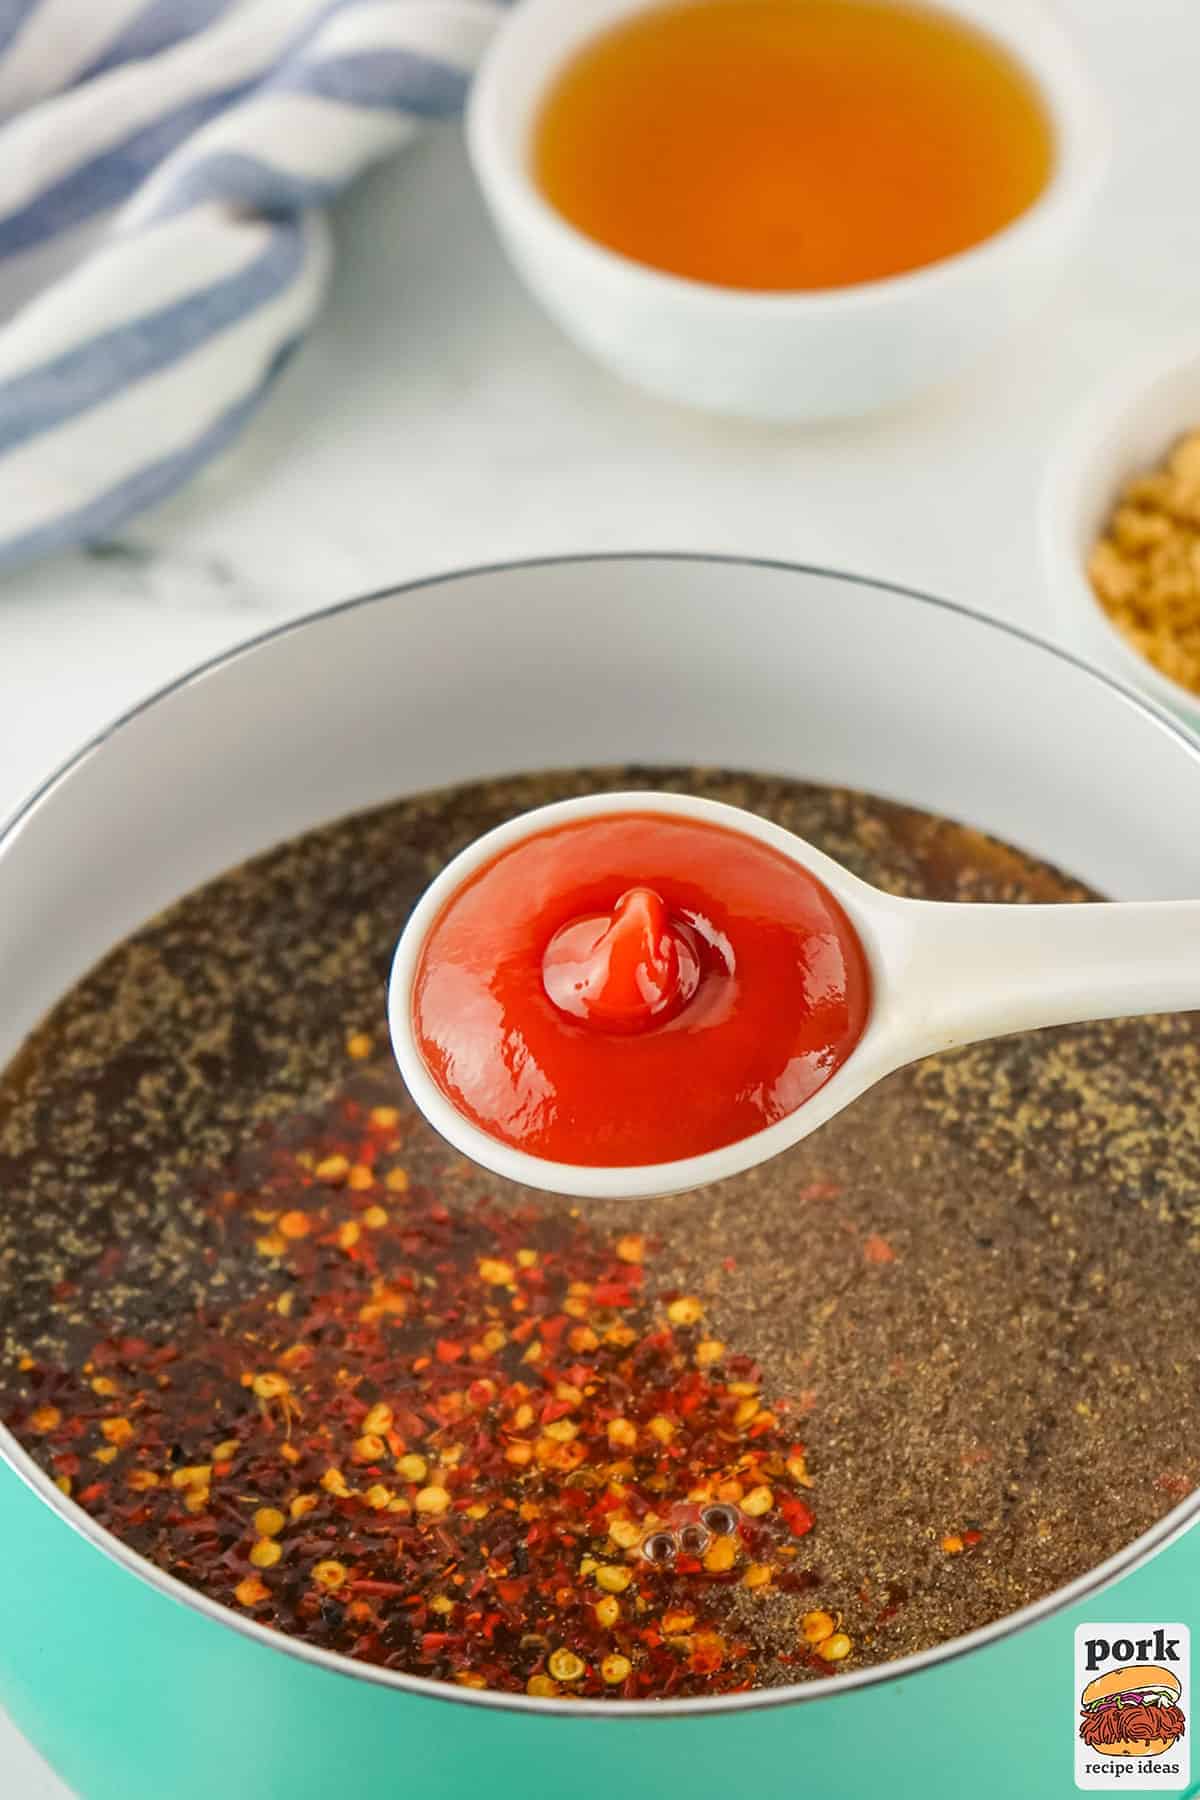 ketchup and other ingredients added to the pan